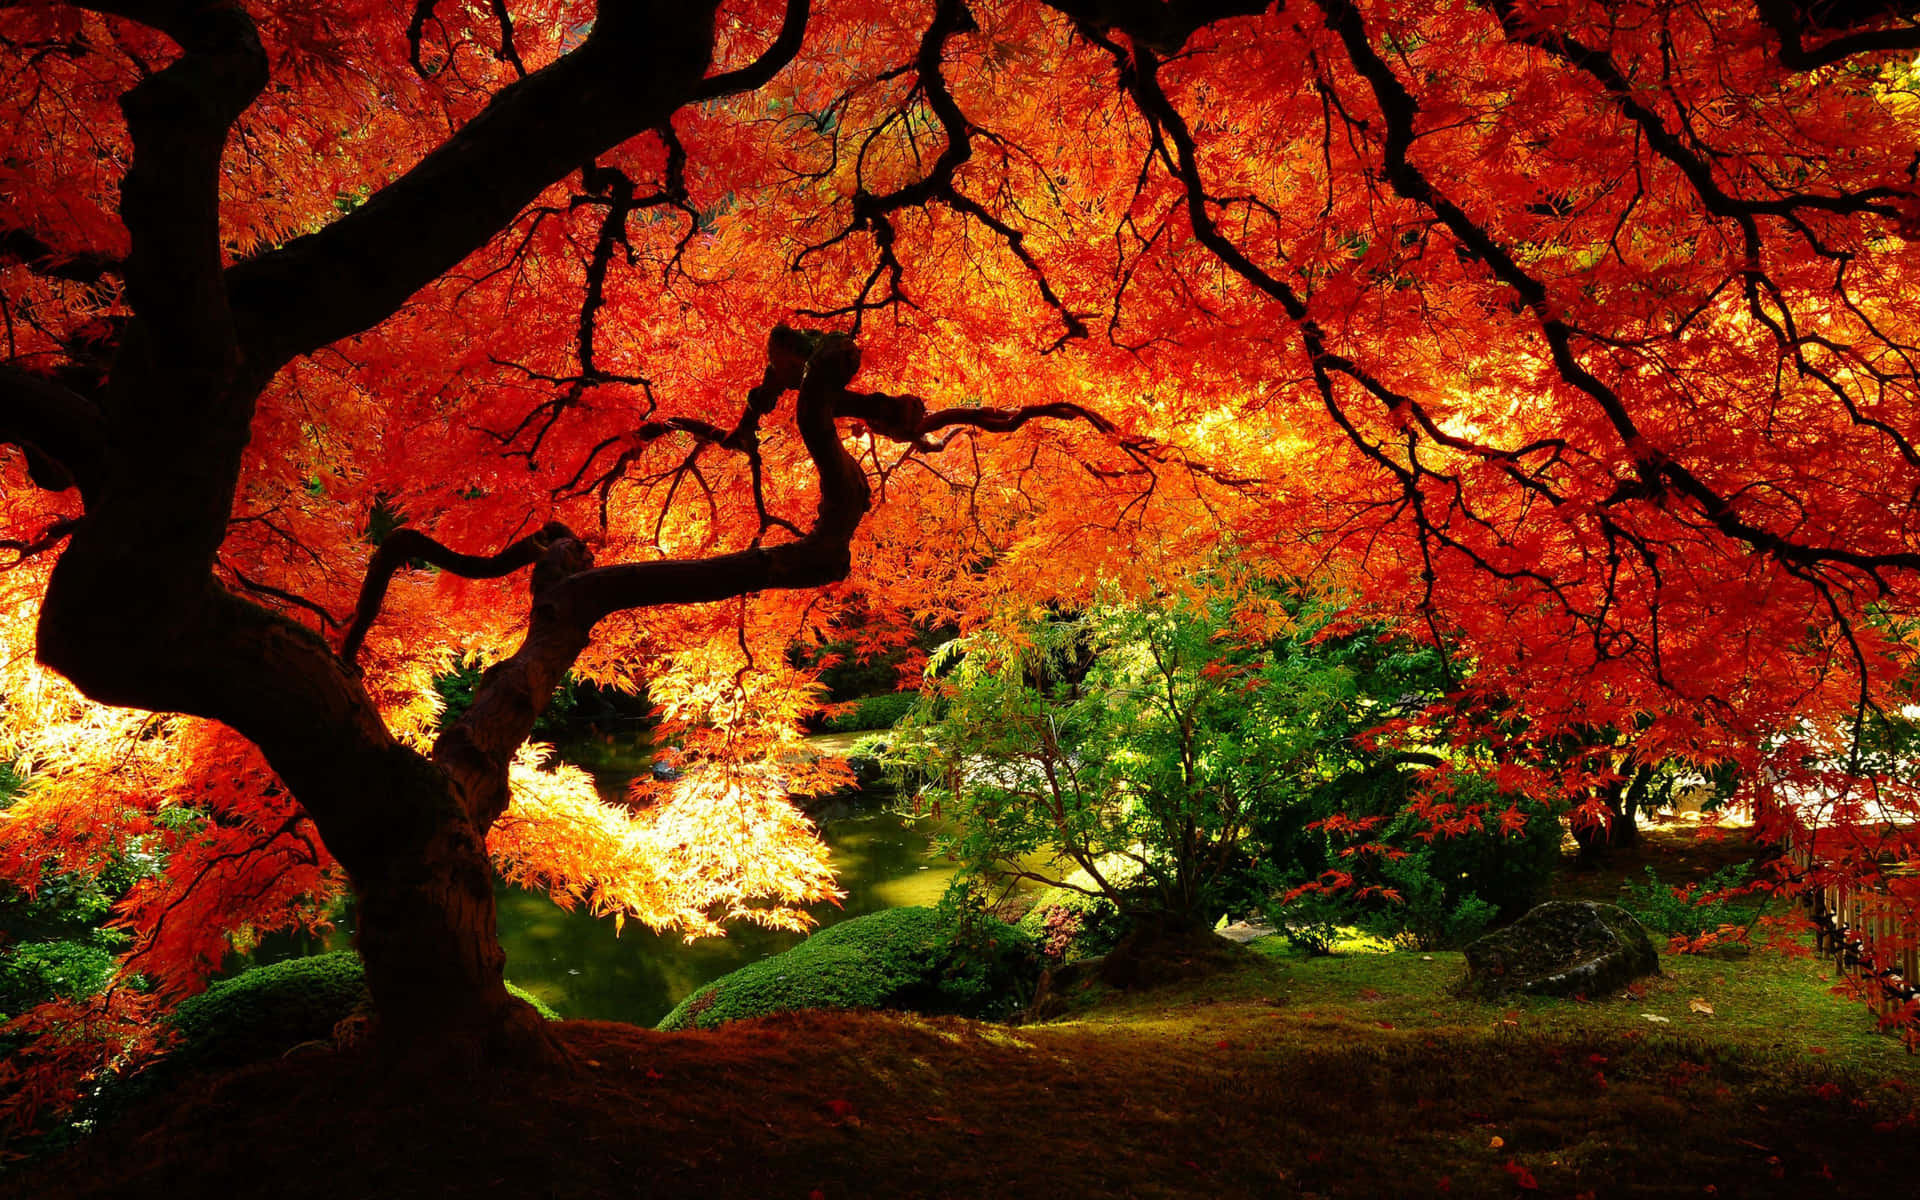 Free Autumn Wallpaper Downloads, [600+] Autumn Wallpapers for FREE |  